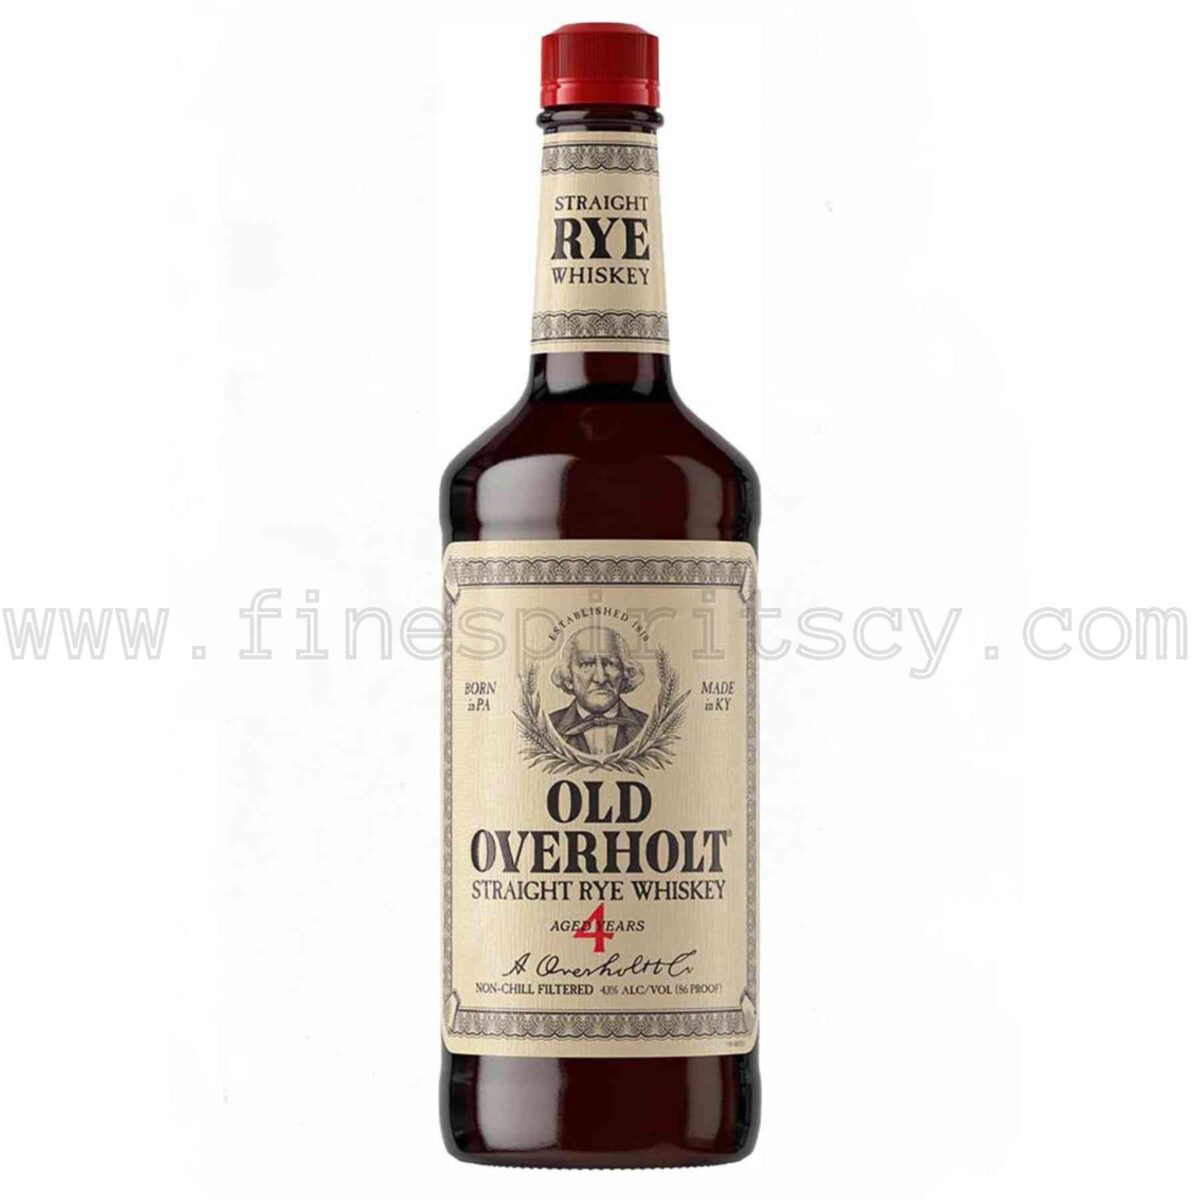 Old Overhold 4 Year Old Straight Rye Whiskey